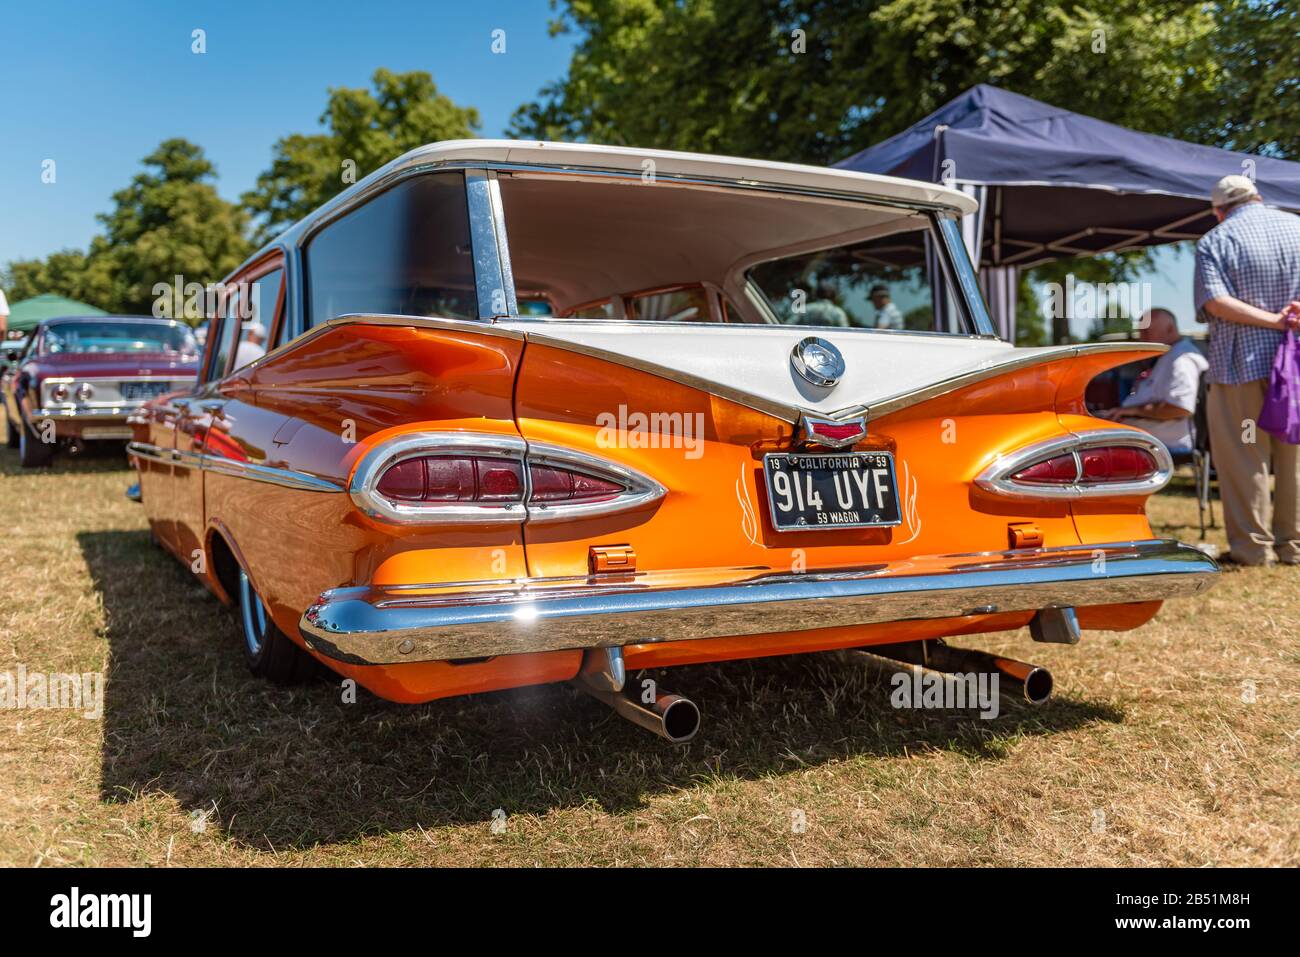 Classic American orange and white station wagon at a car show Stock Photo